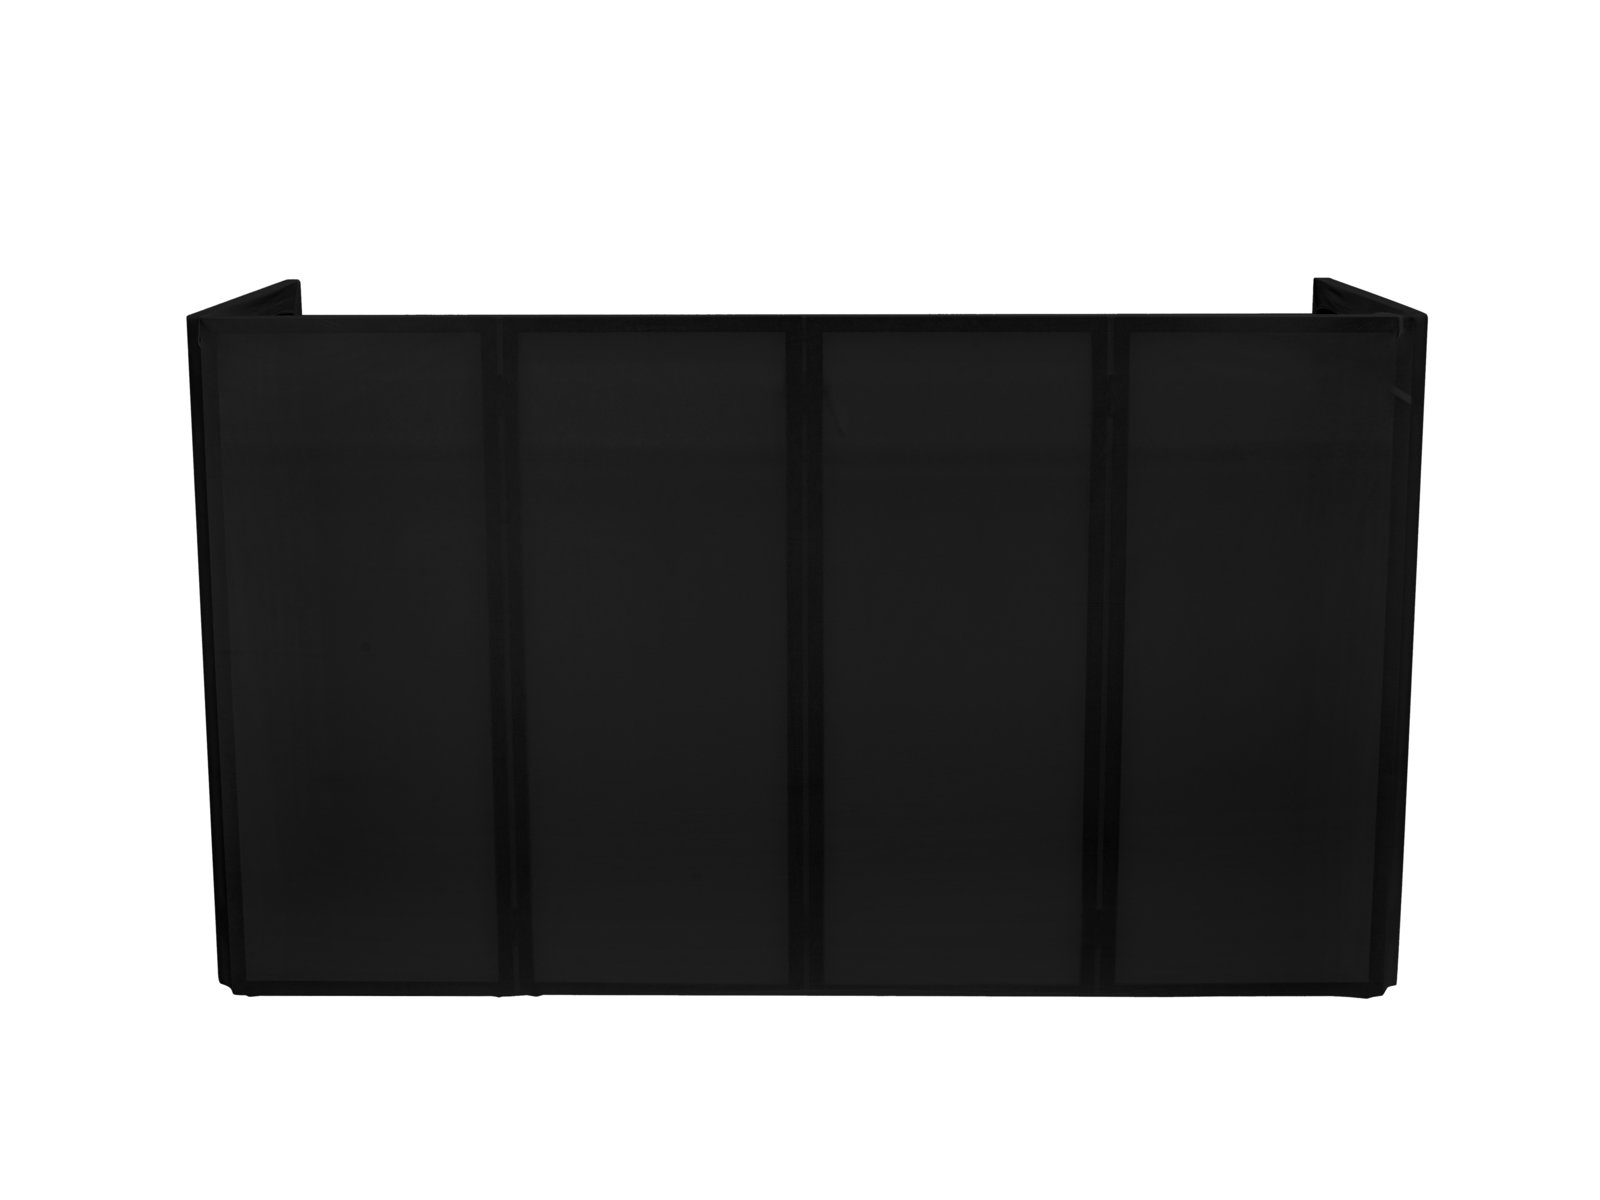 OMNITRONIC Spare Cover for Large Mobile DJ Stand black